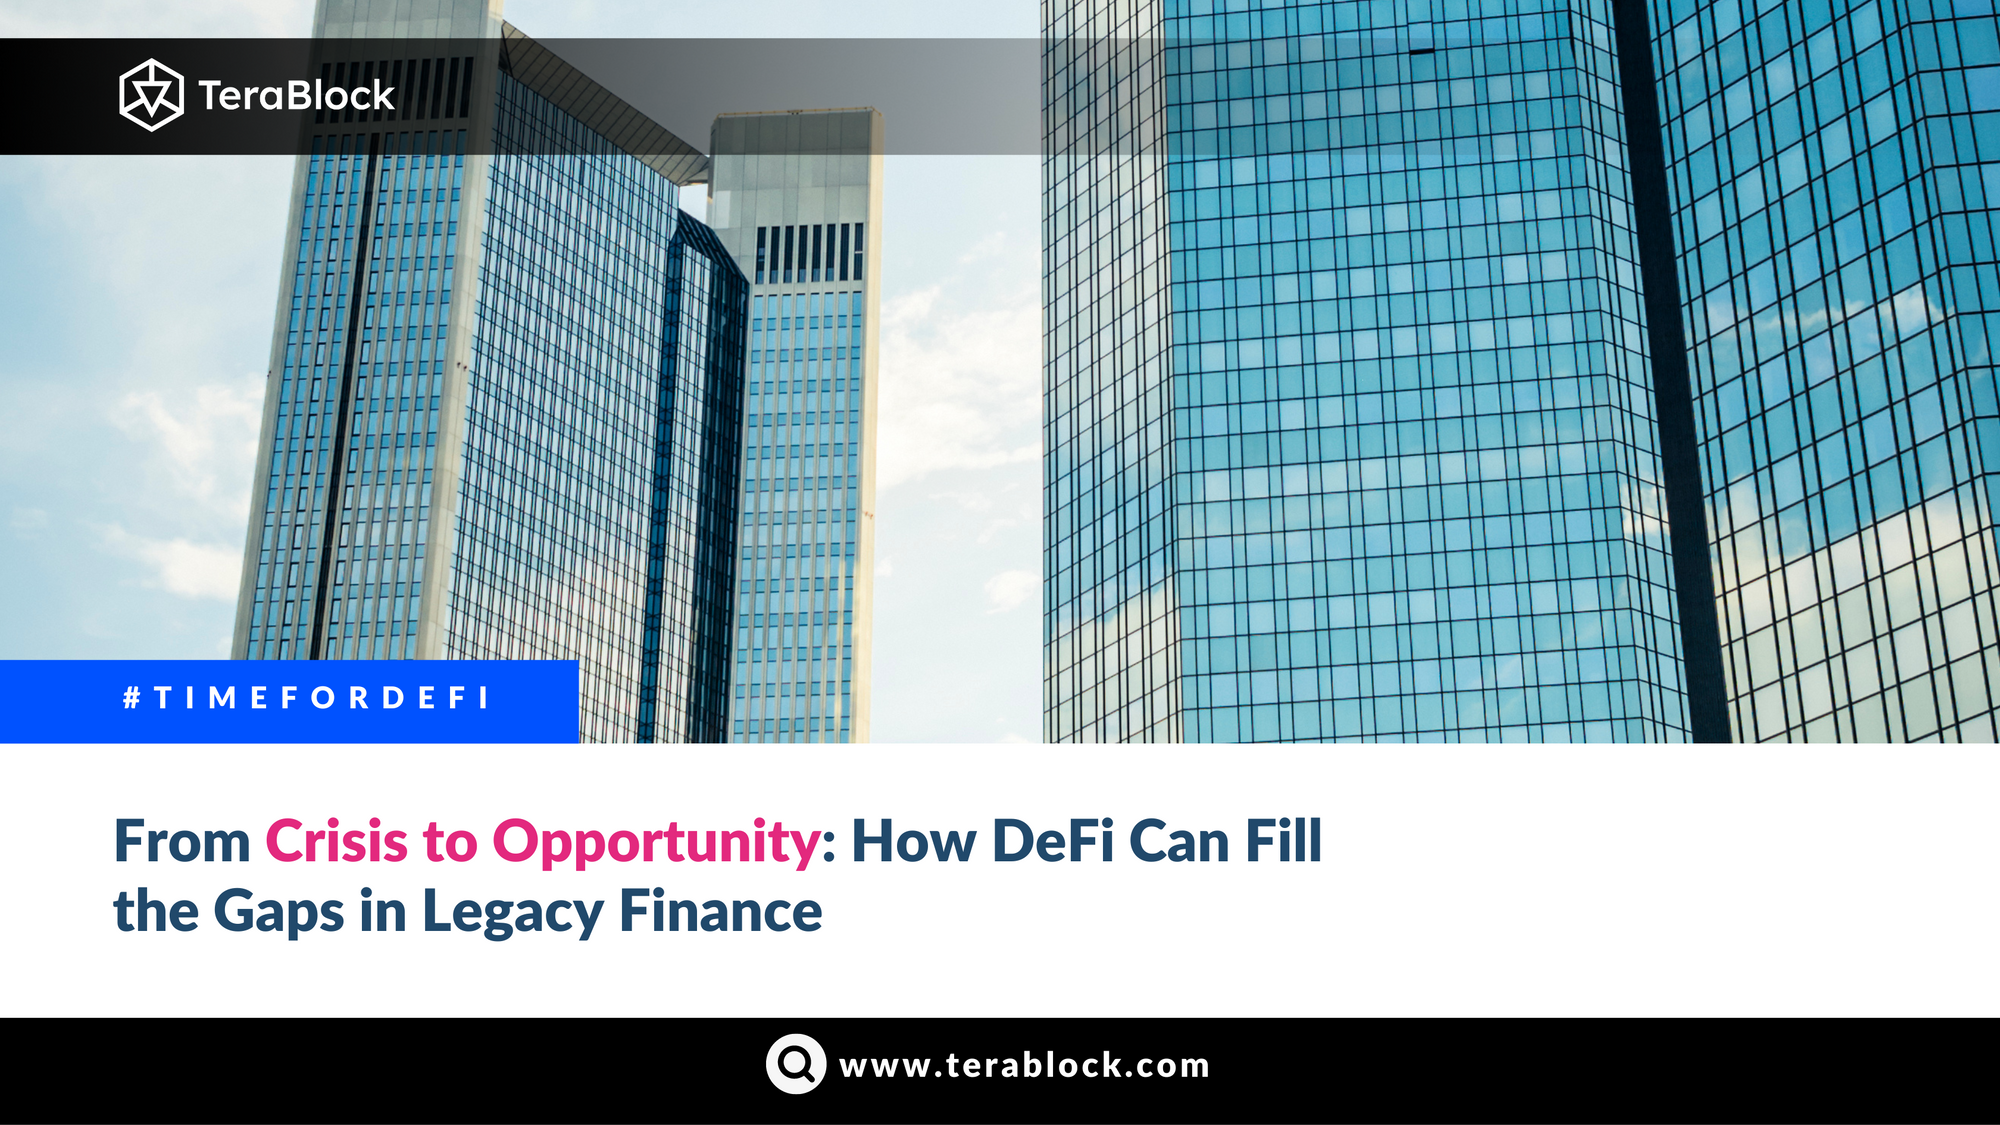 From Crisis to Opportunity: How DeFi can Fill the Gaps in Legacy Finance